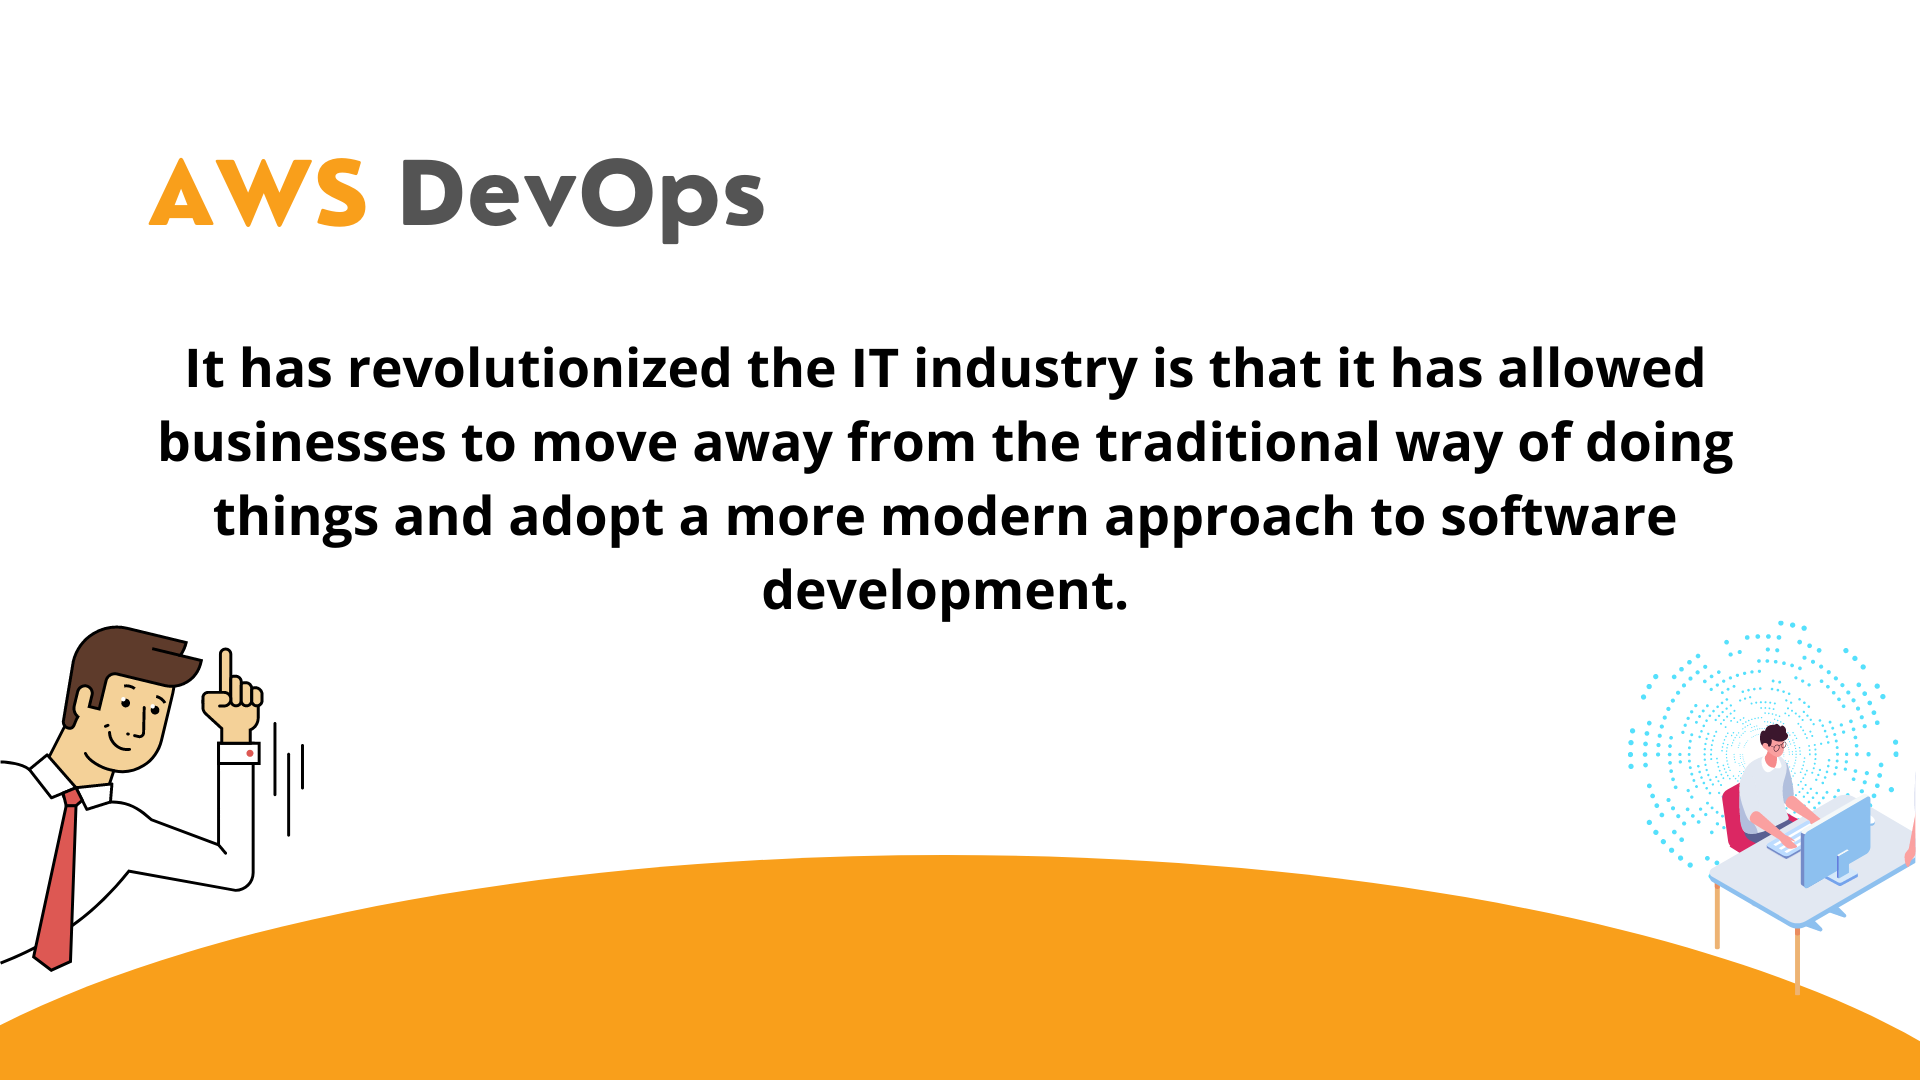 aws devops services - Why AWS DevOps important in the IT industry.